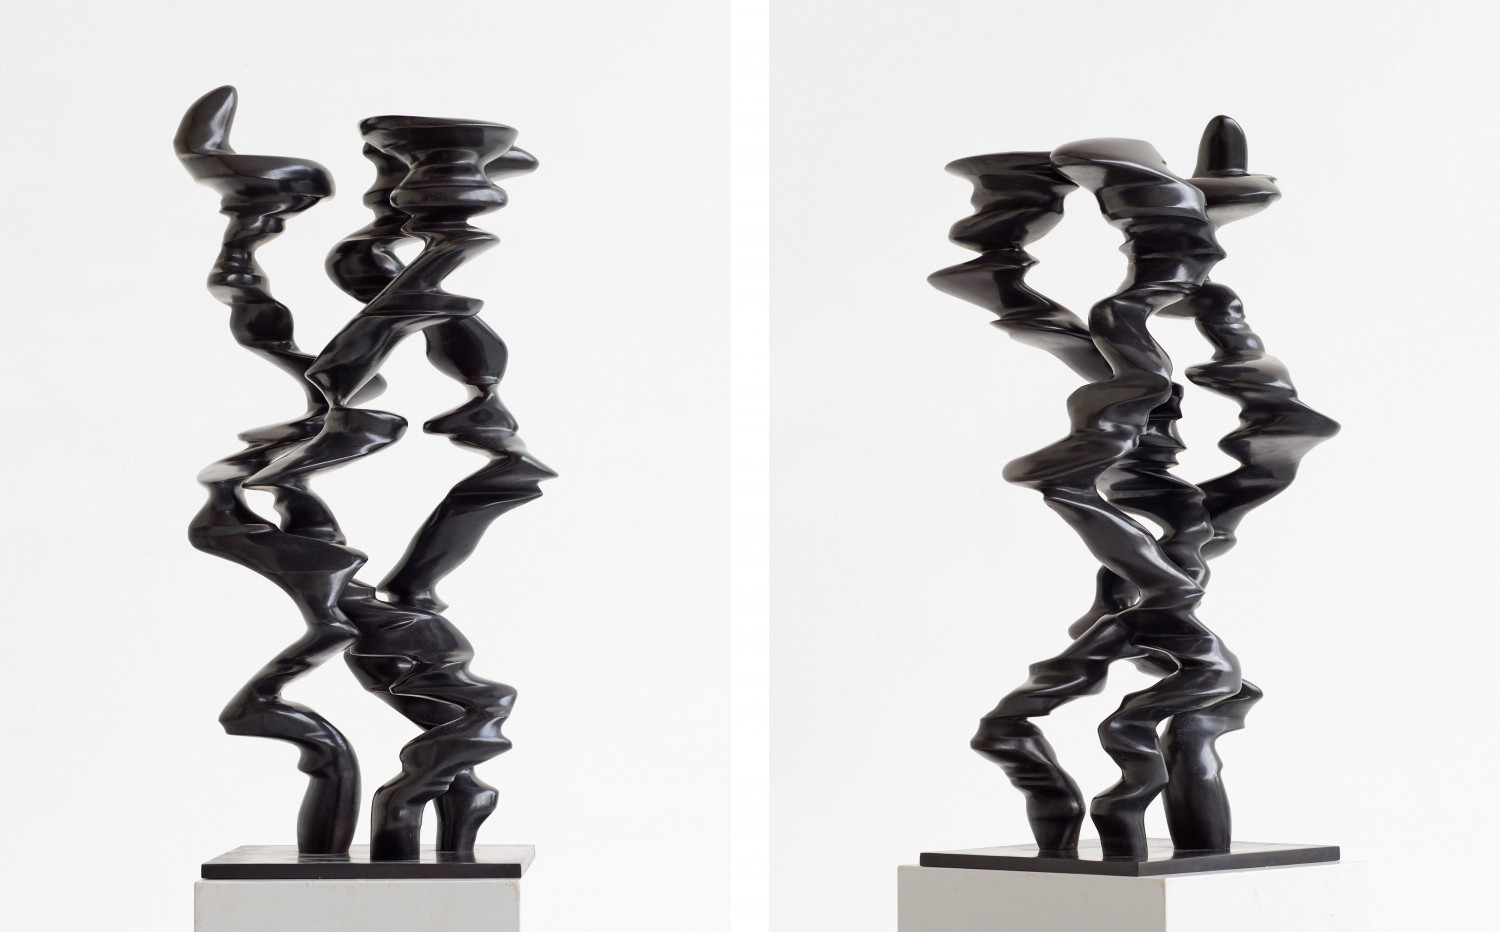 A sculpture with three columns by the british artist Tony Cragg